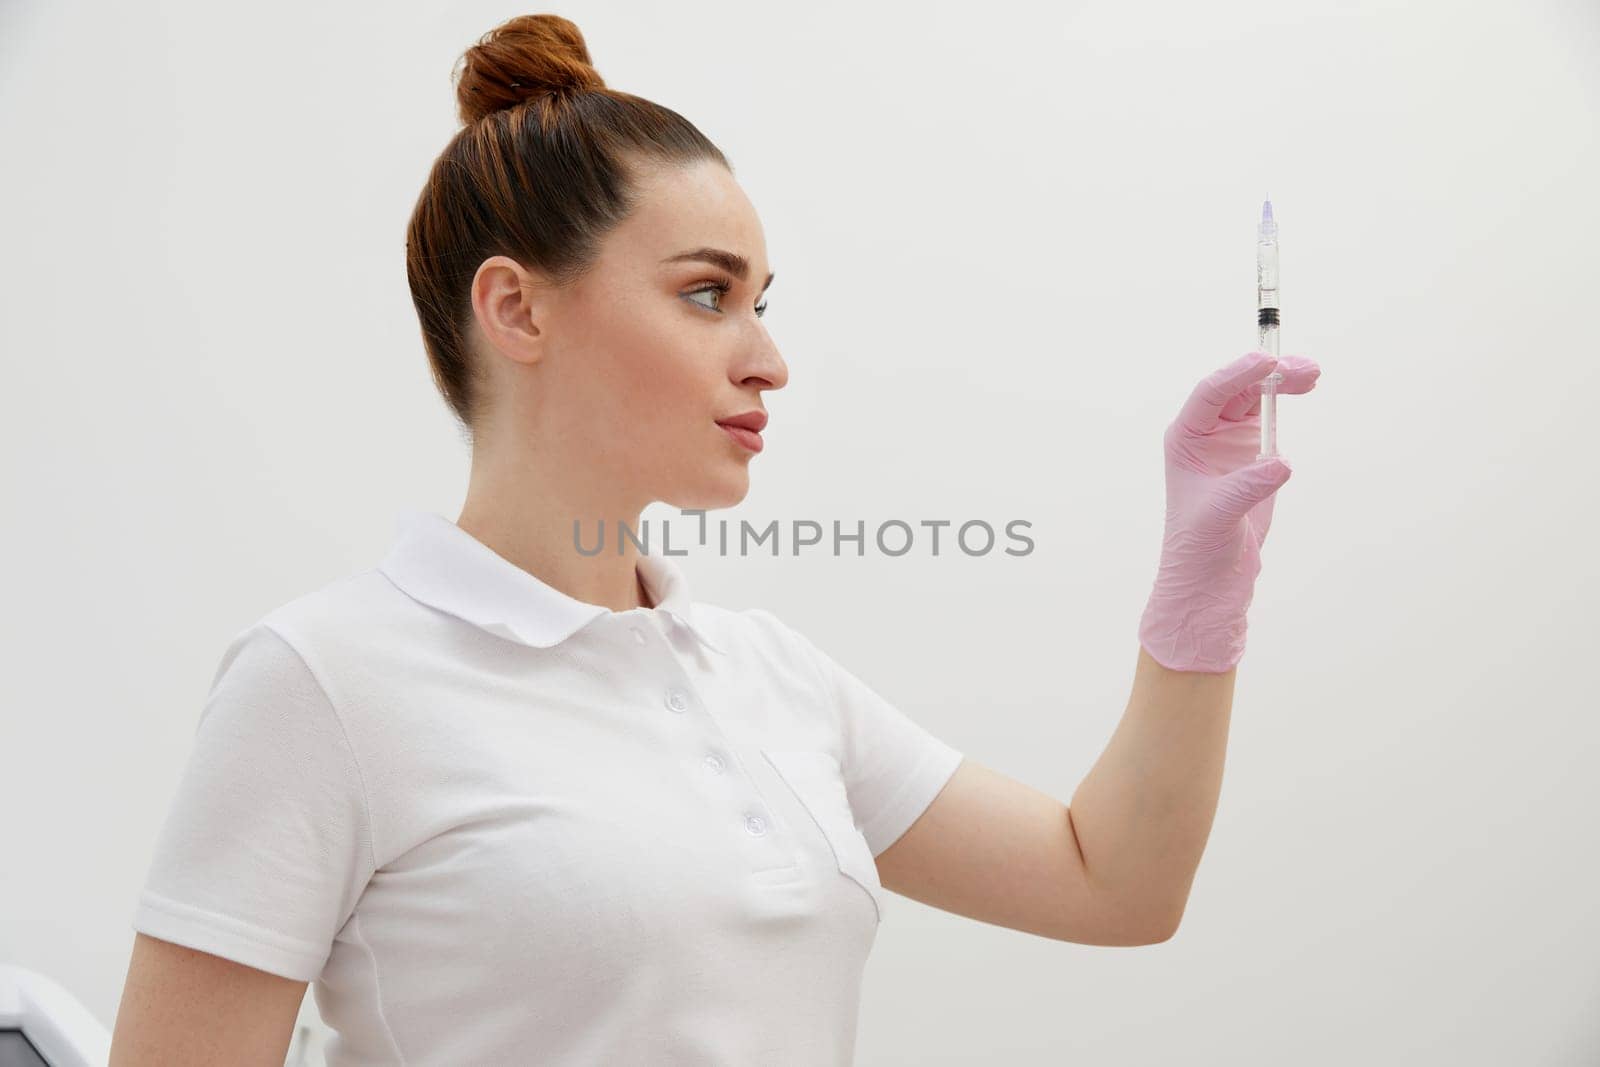 Cosmetologist holds syringe for injection with collagen hyaluronic filler for face or lips rejuvenation by Mariakray